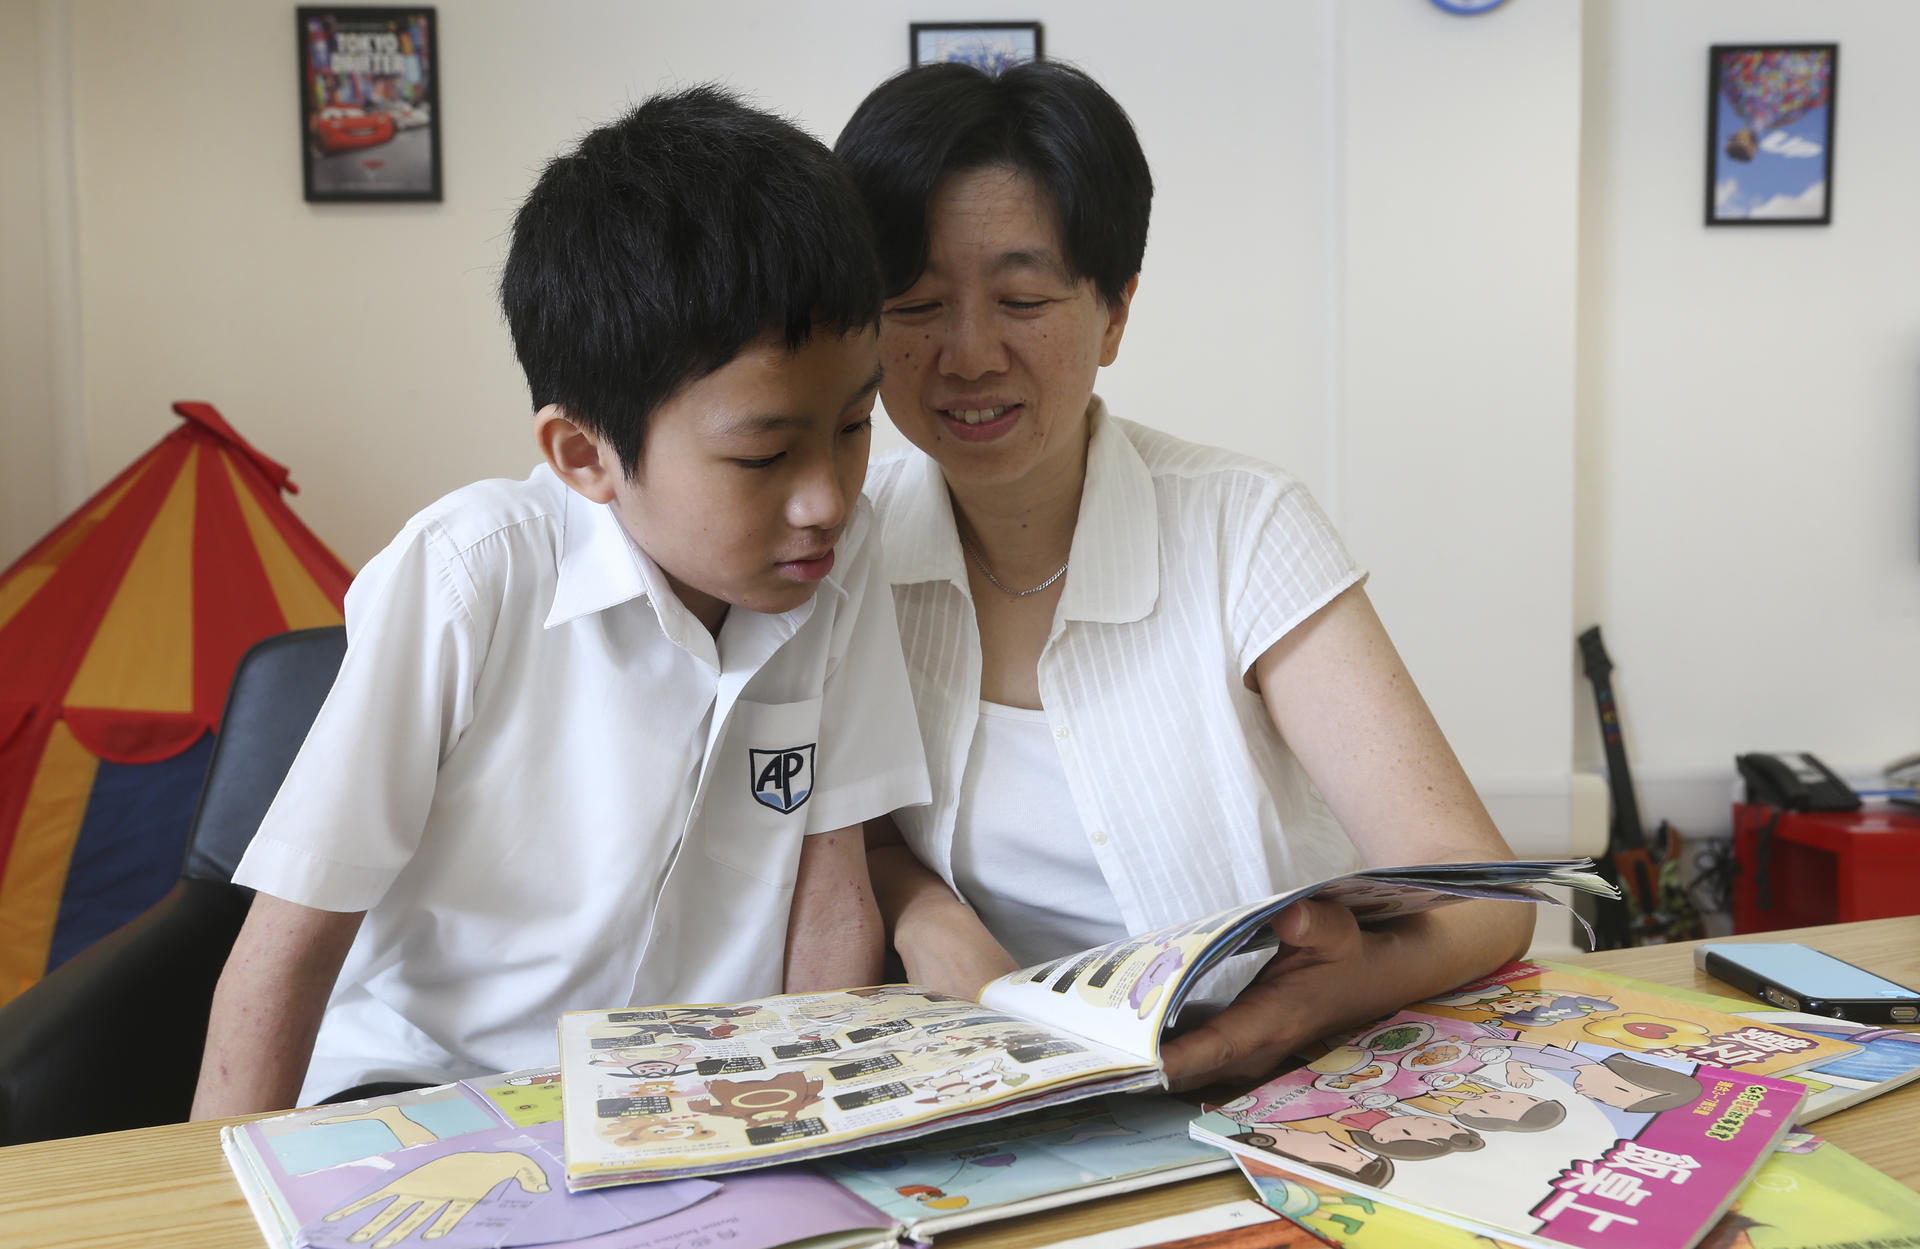 Josephine Cheung and her son Ah Ching at Aoi Pui School. Photo: K.Y.Cheng